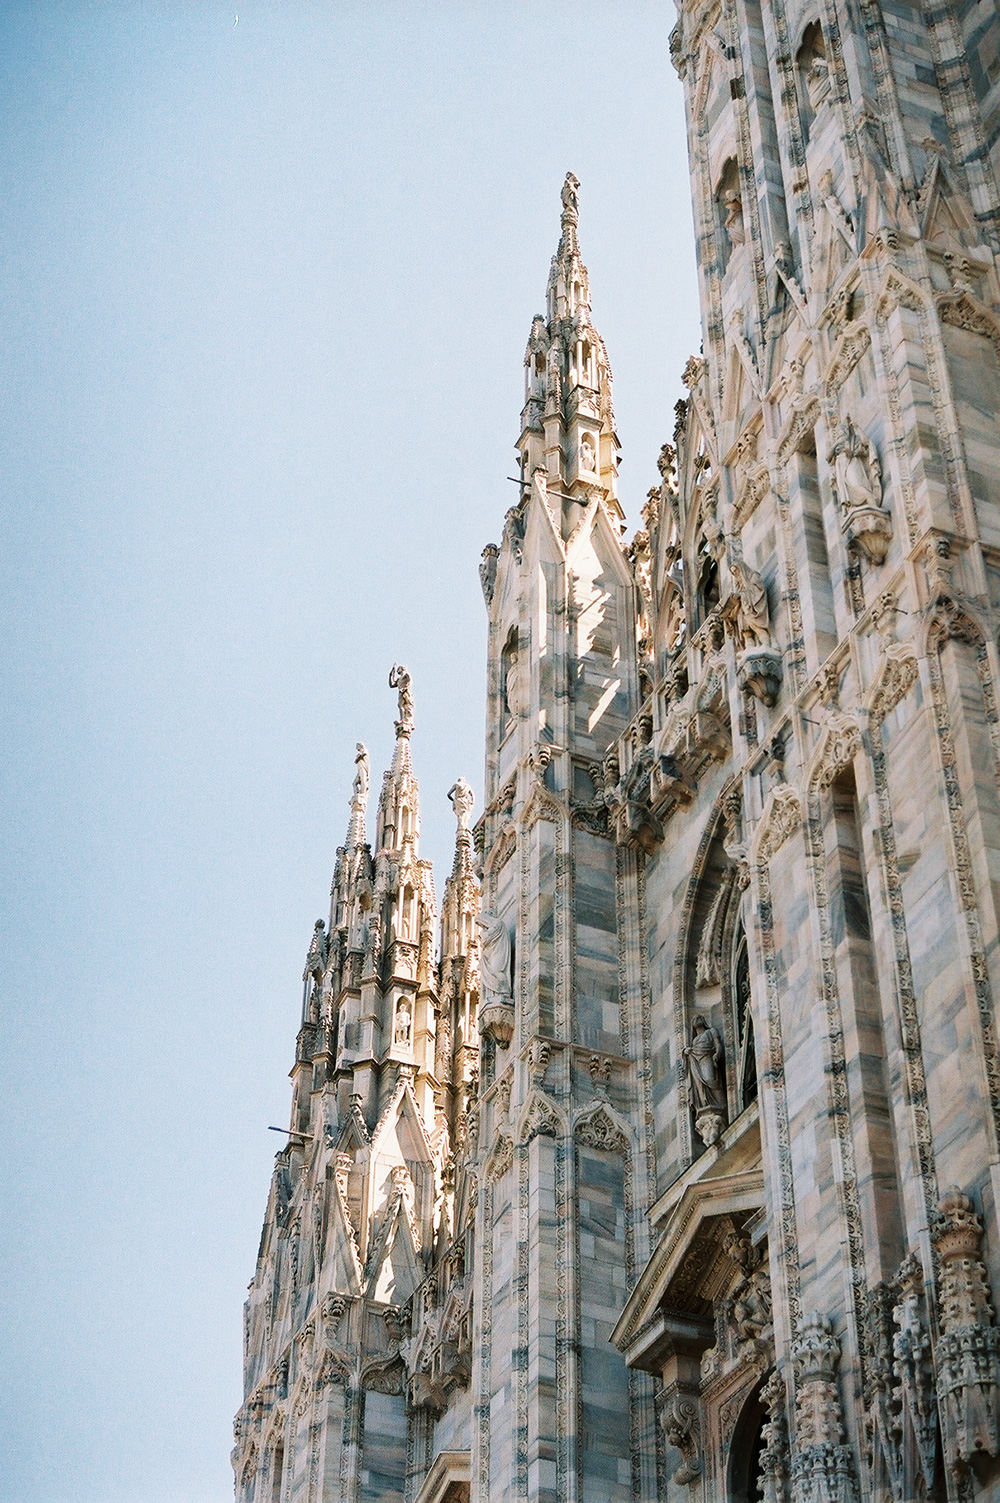 Analog photo of the Milan Cathedral.